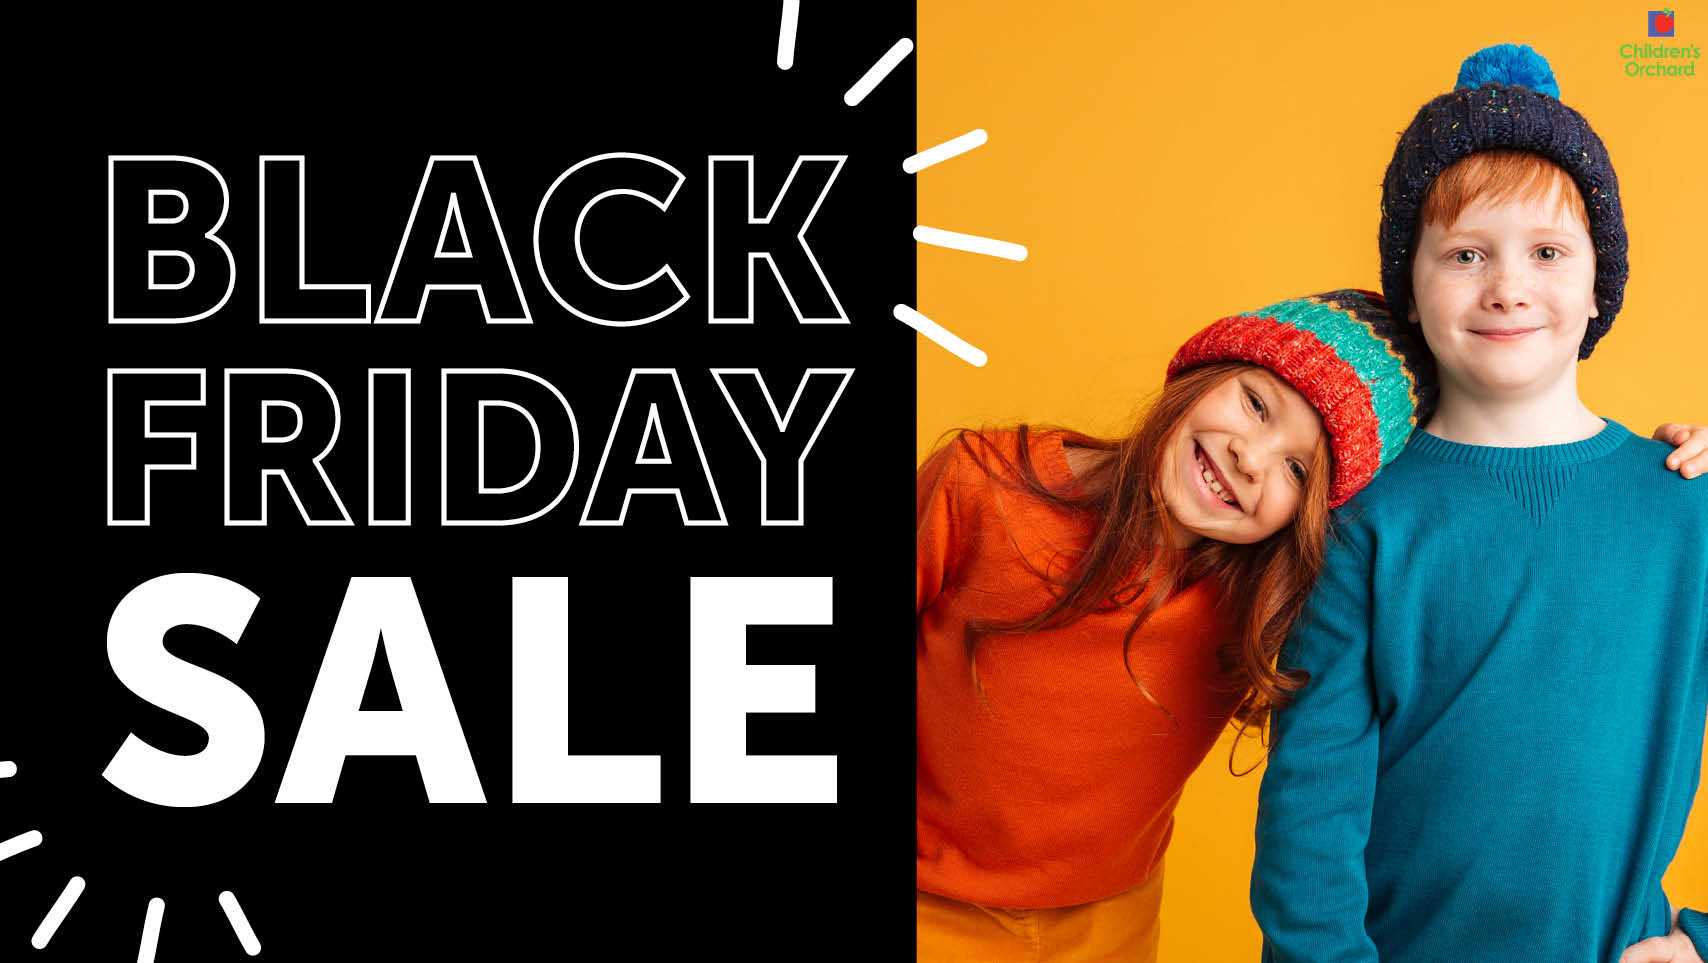 Black Friday Sale. Two kids wearing hats and sweaters.